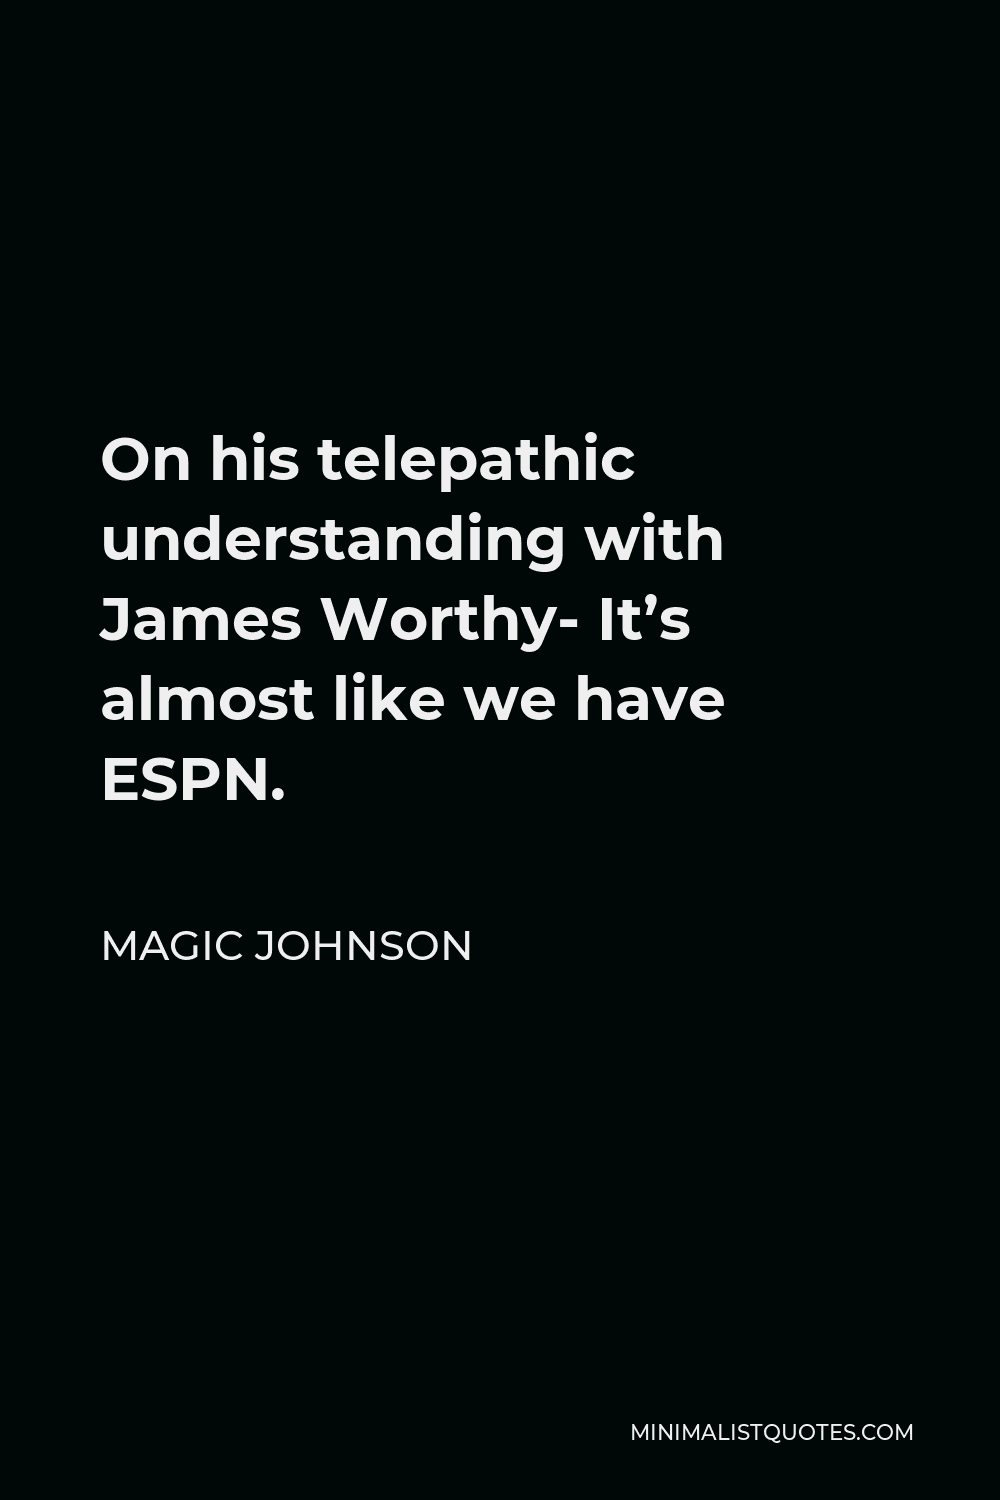 Magic Johnson Quote - On his telepathic understanding with James Worthy- It’s almost like we have ESPN.